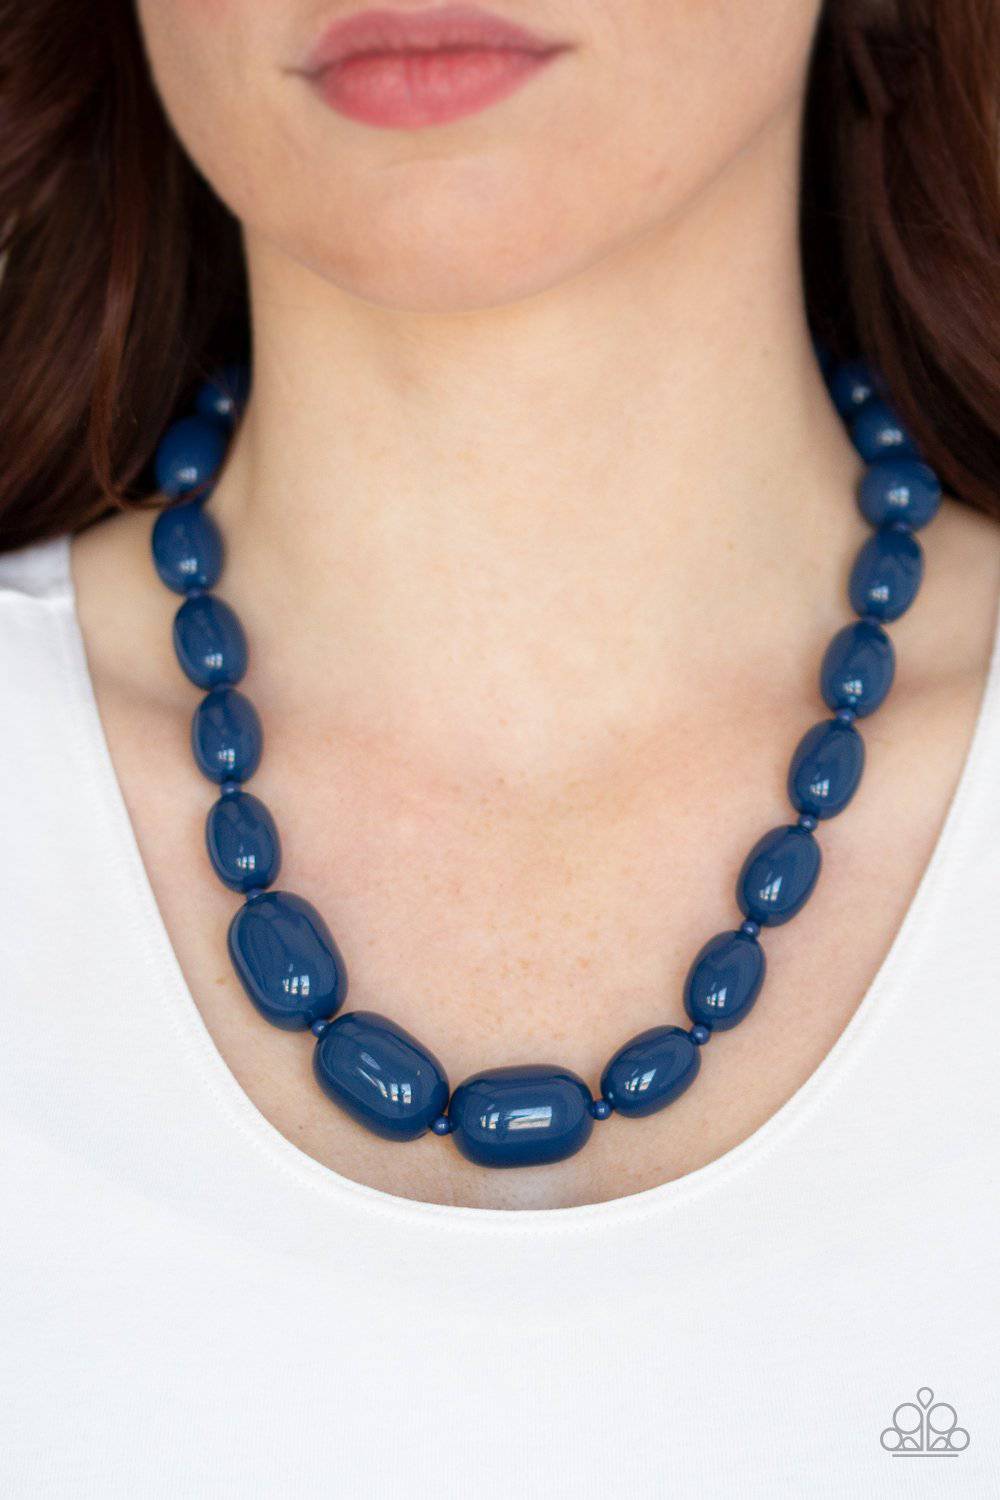 Poppin Popularity - Blue Bead Necklace - Paparazzi Accessories - GlaMarous Titi Jewels